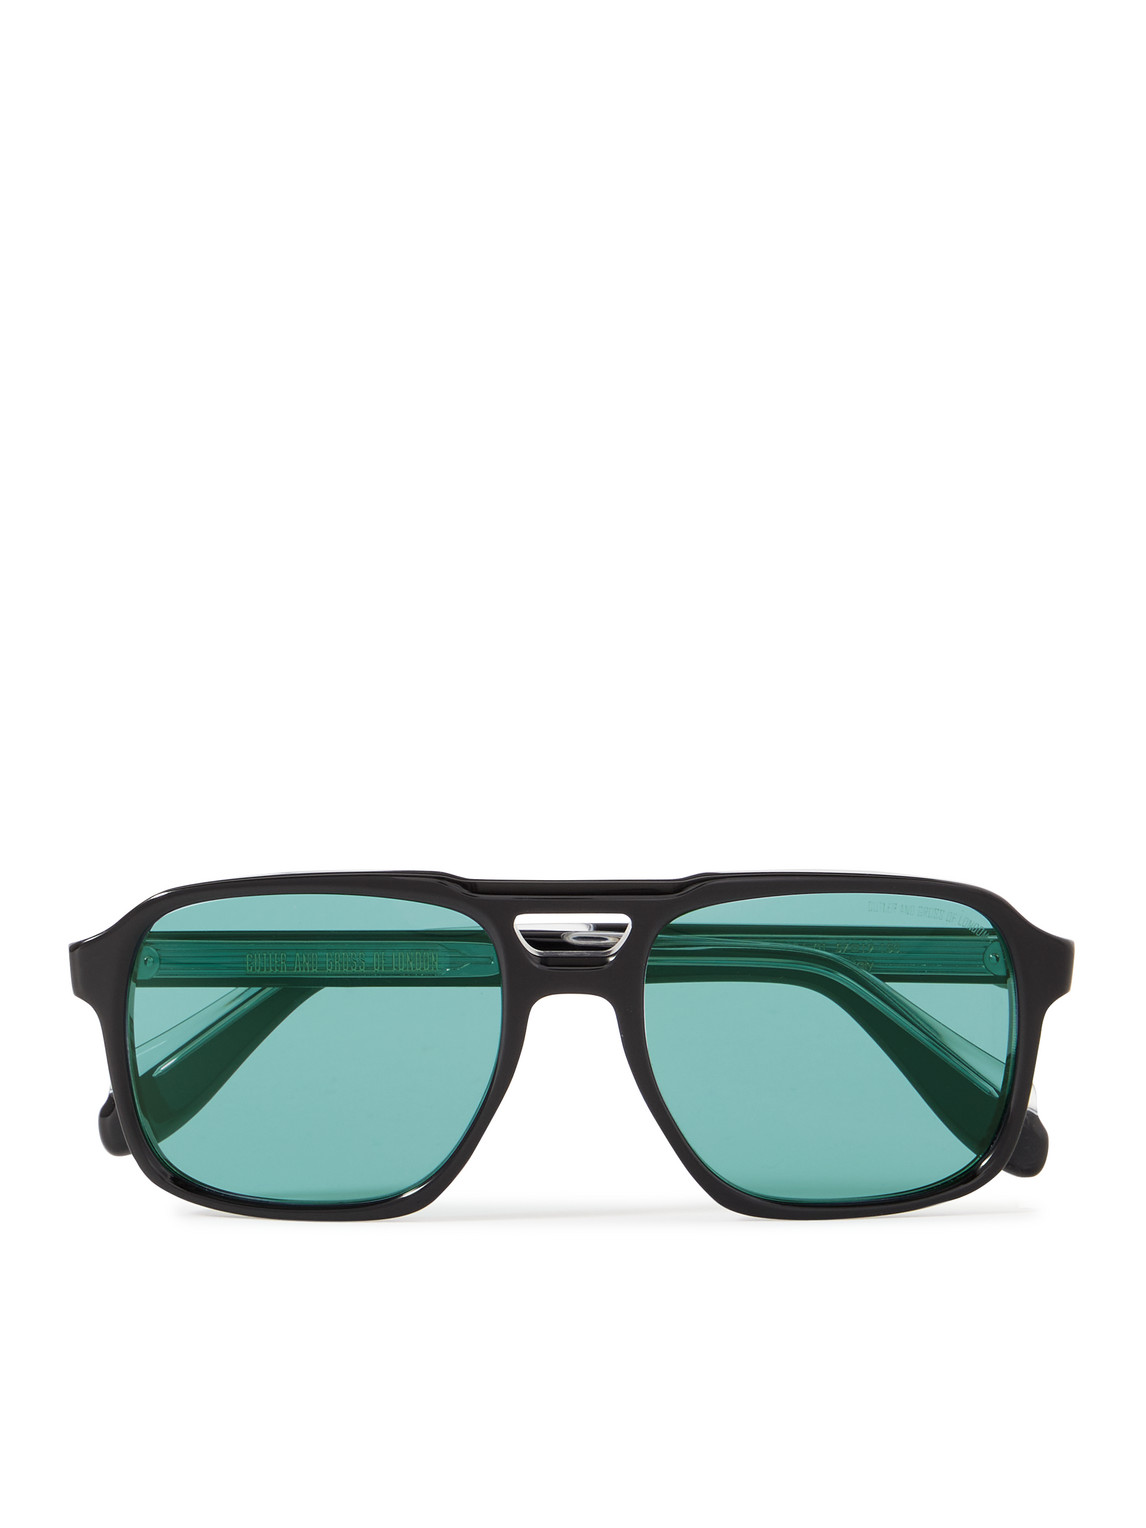 Shop Cutler And Gross 1394 Aviator-style Acetate Sunglasses In Black